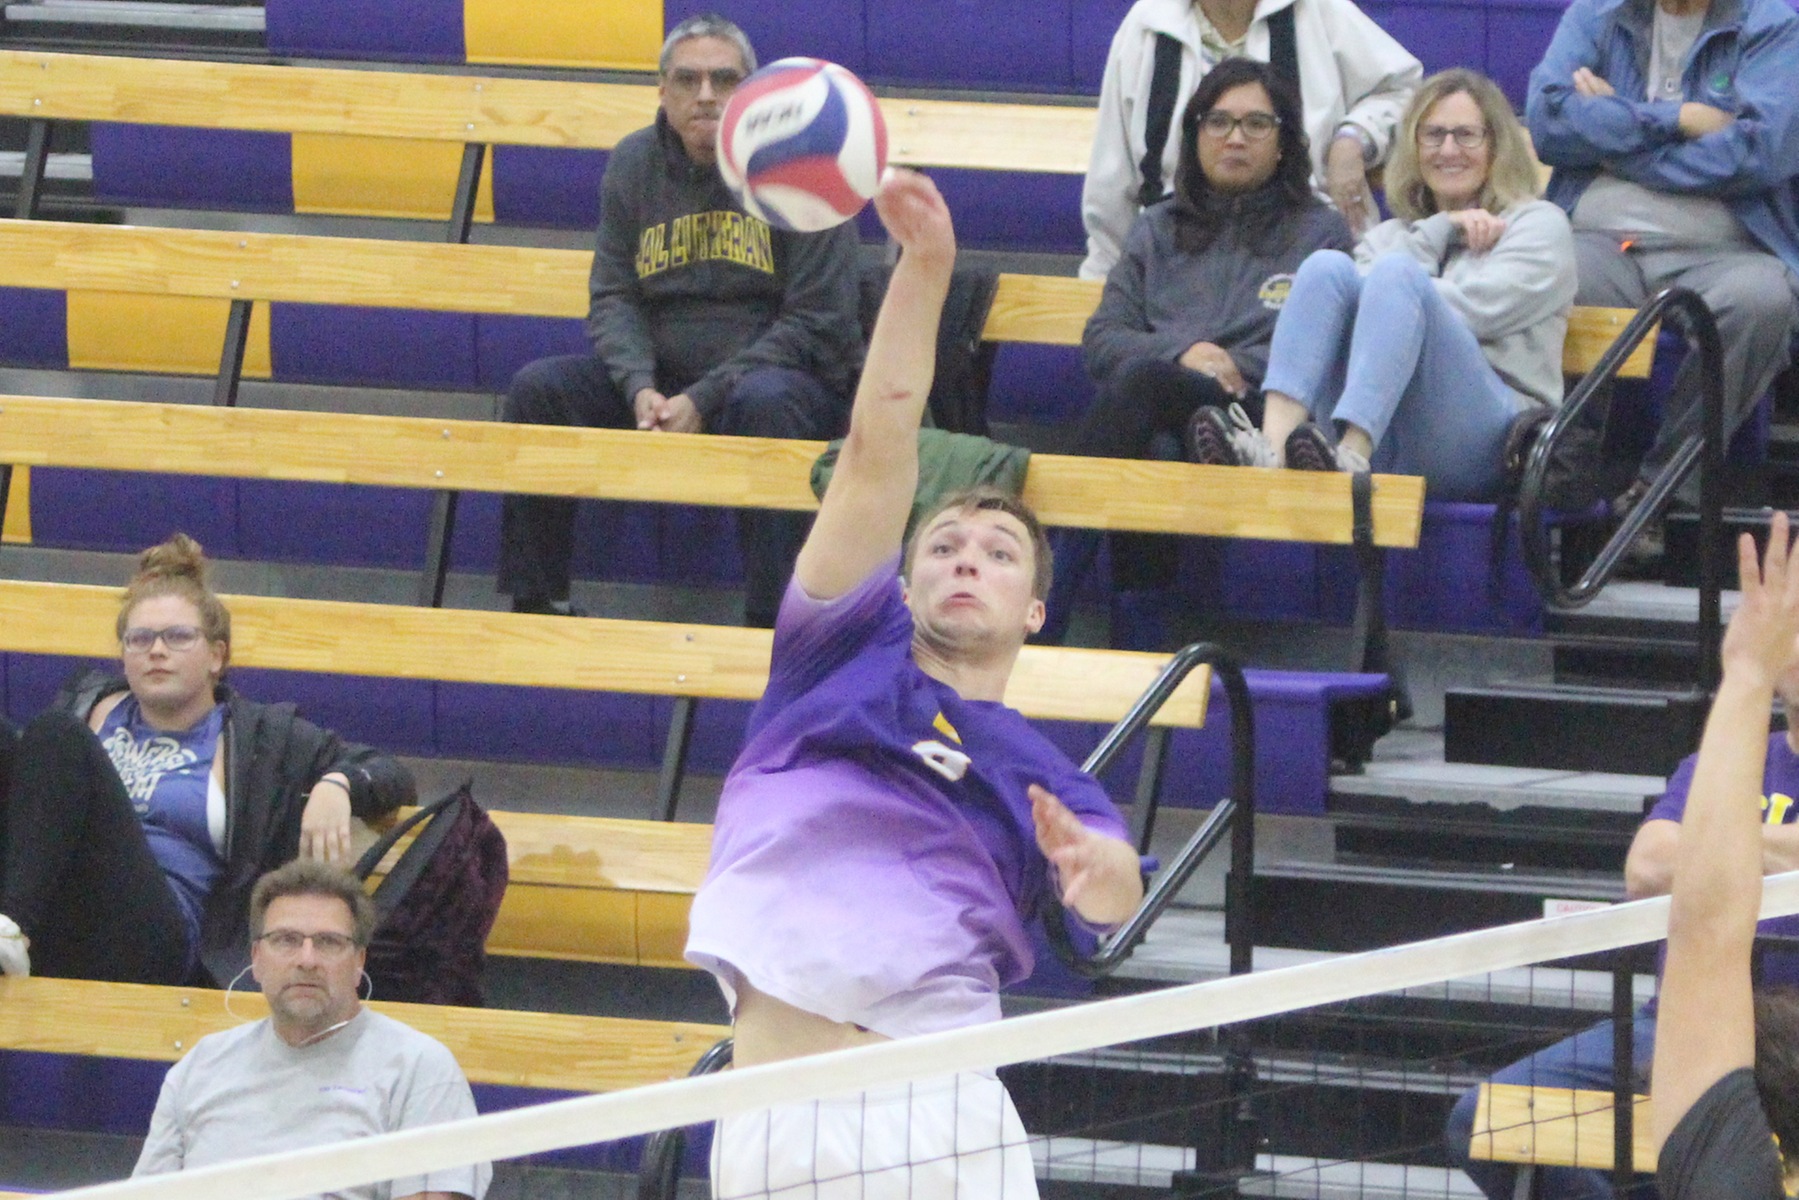 Patrick Rowe tallied 12 kills with a .476 hitting percentage as the Kingsmen swept the Cardinals.